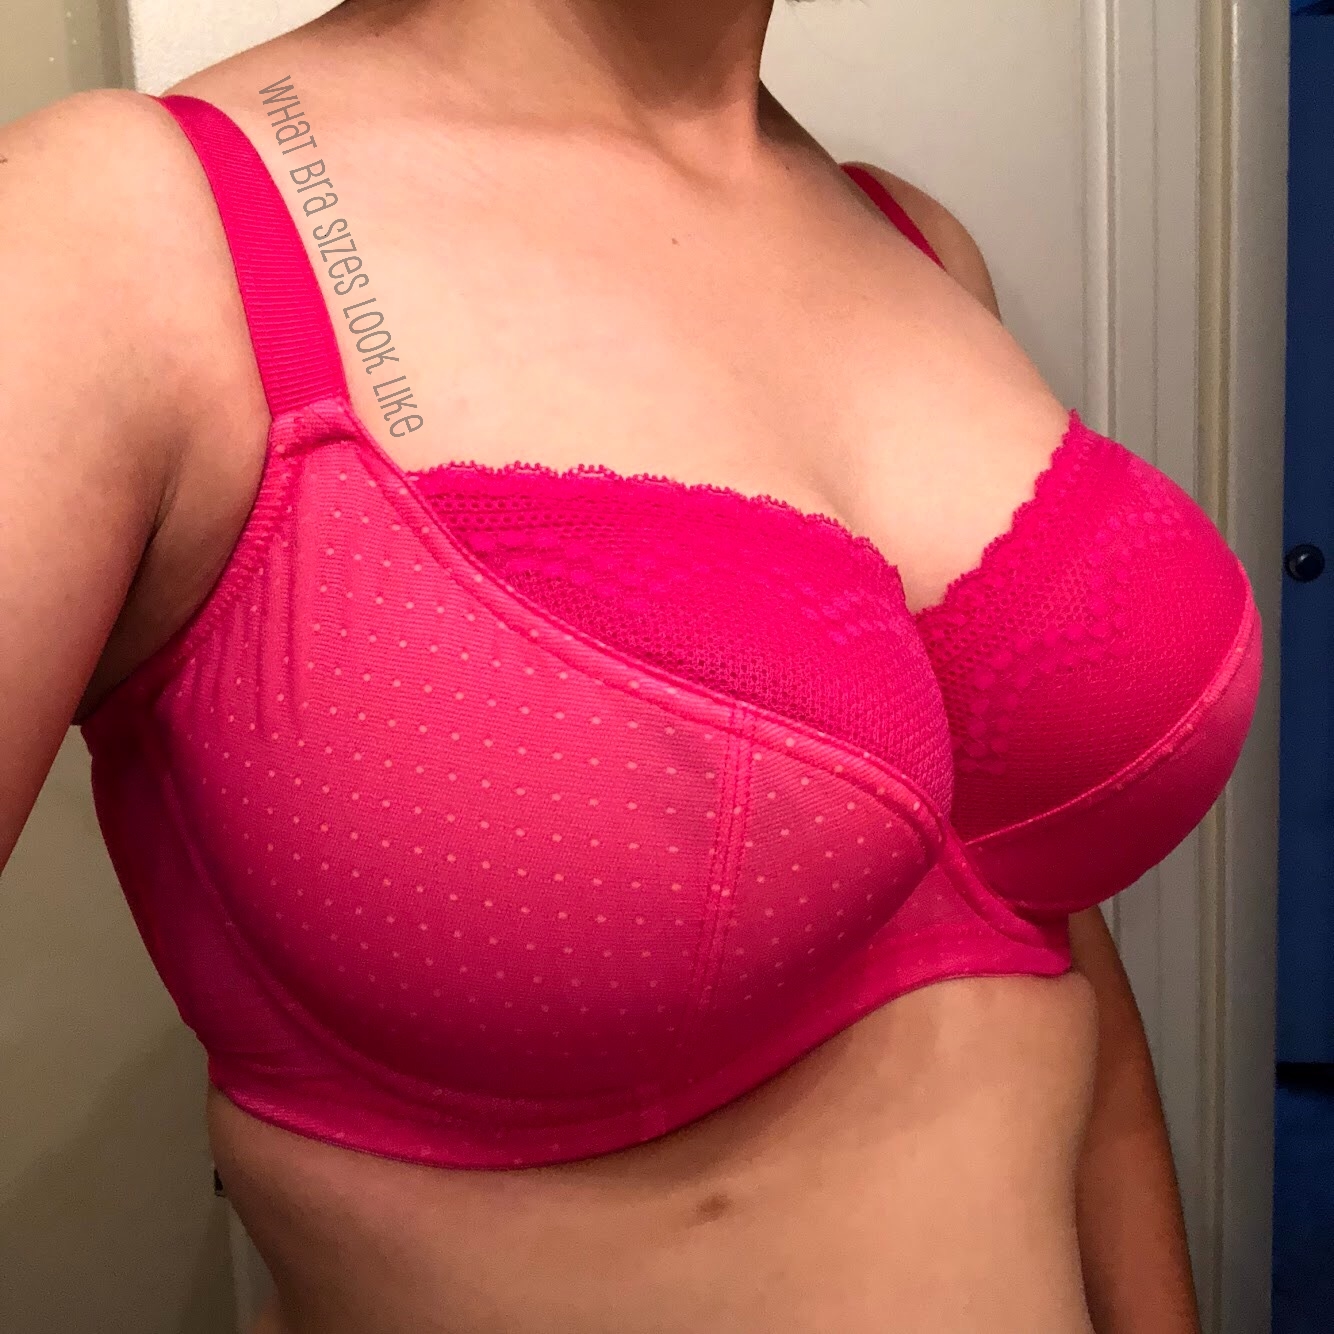 Comments: “Prior to being fitted in the appropriate 30H, I was we...